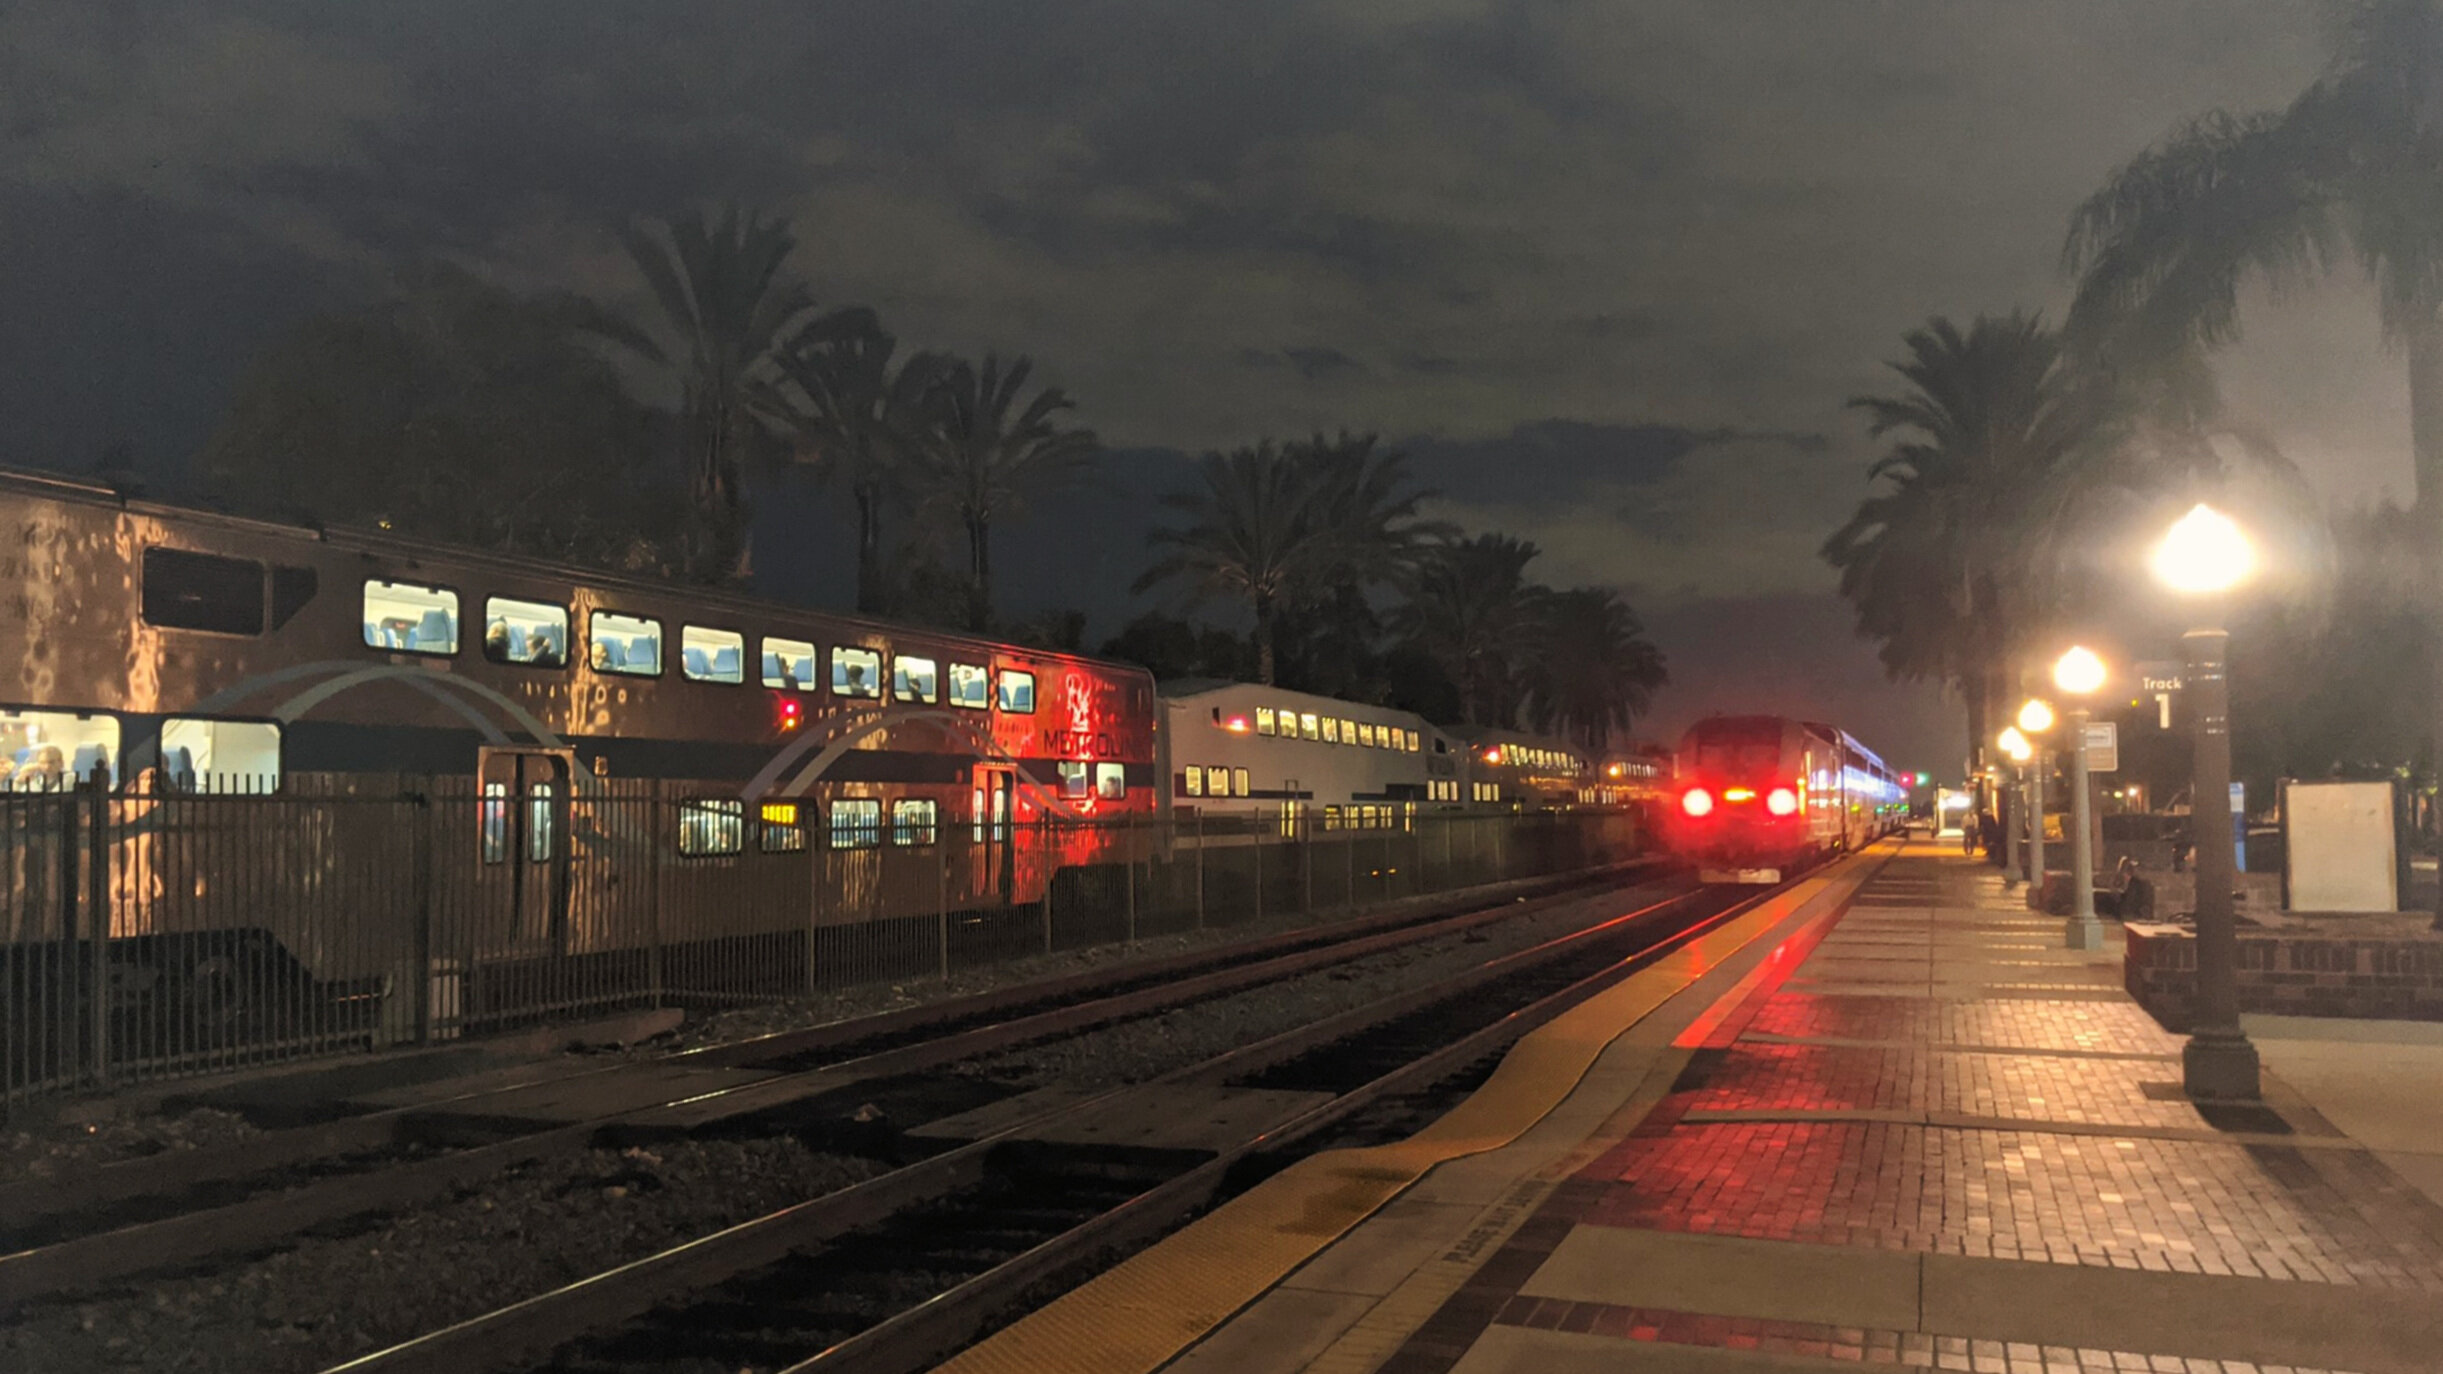  Peak hour at Fullerton, CA, on a damp November evening. Photo by Alex Lewis, 2019.  